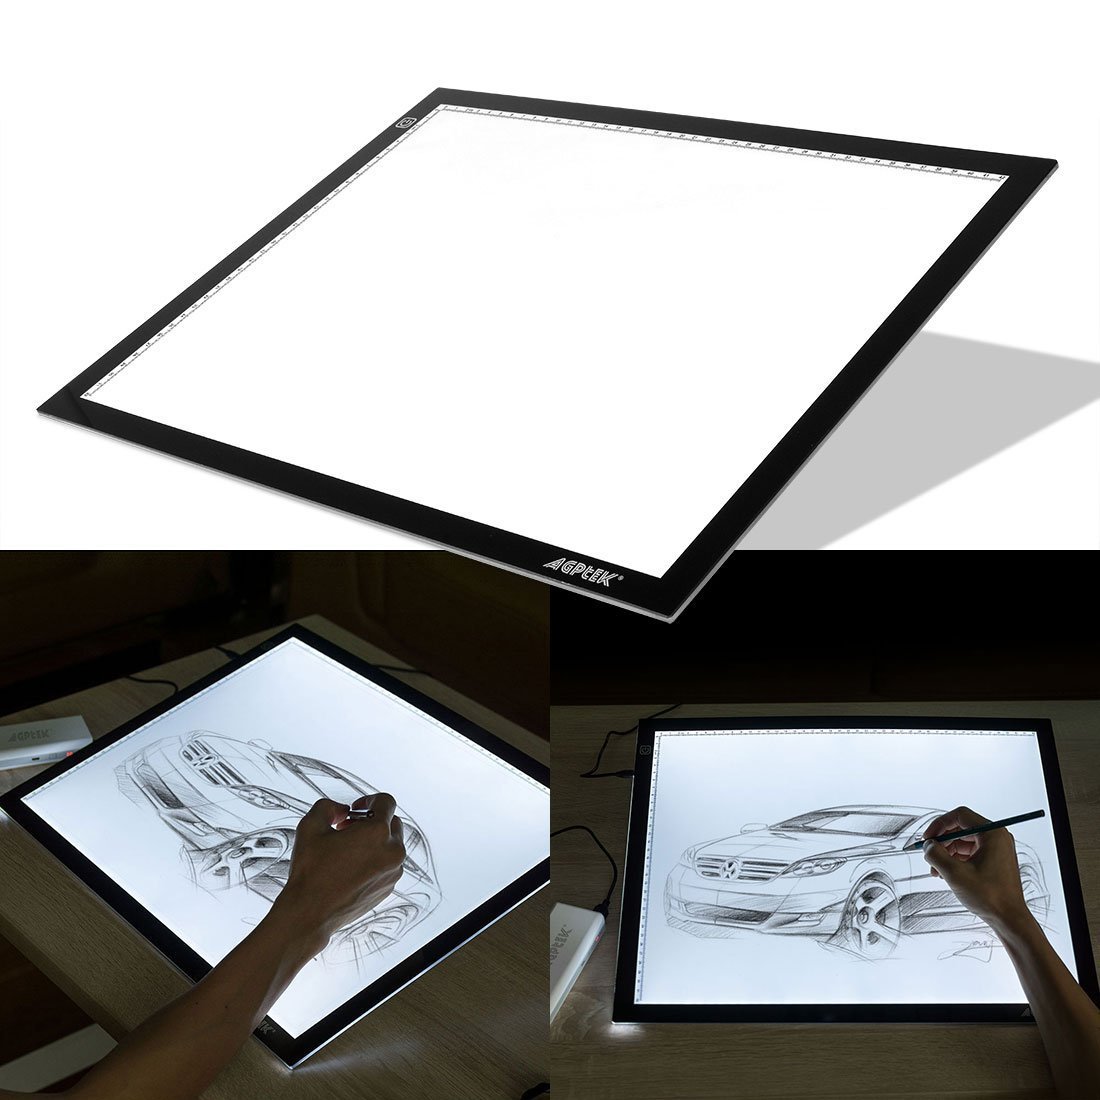 Animation Studio Stuff for Students: Purchasing an Animation Desk or  Lightbox